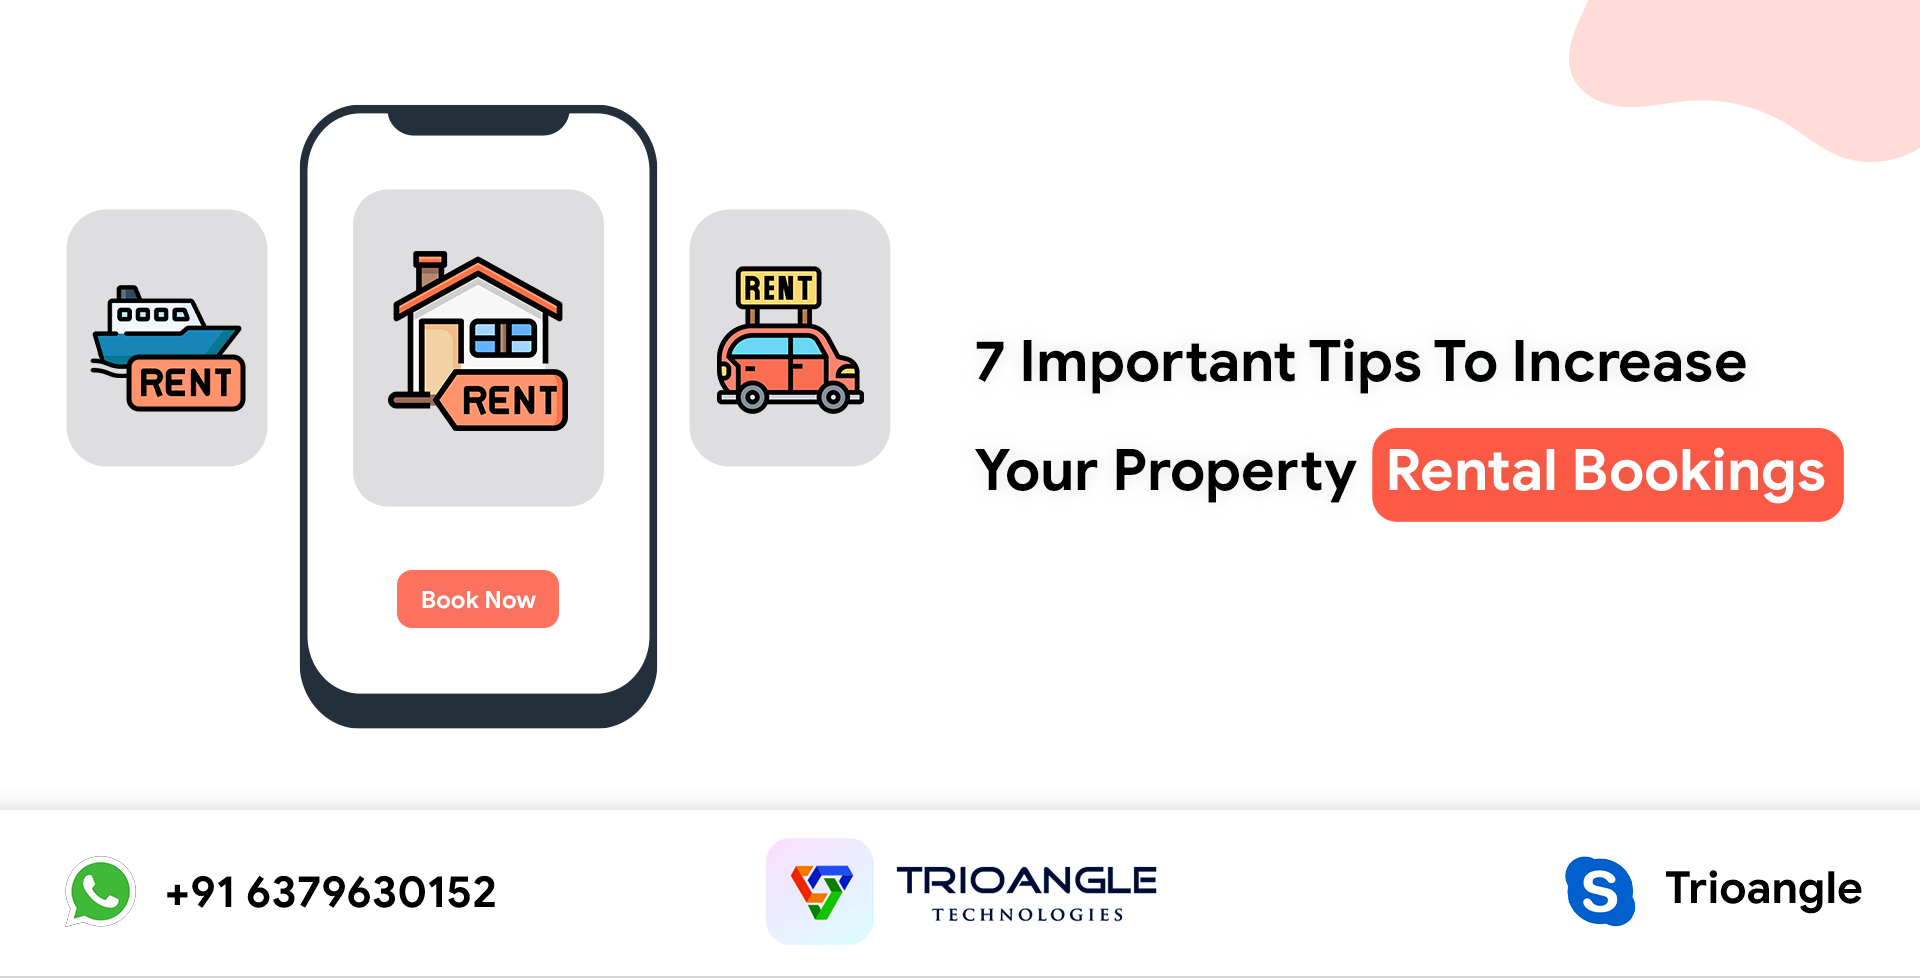 7 Important Tips To Increase your Property Rental Bookings